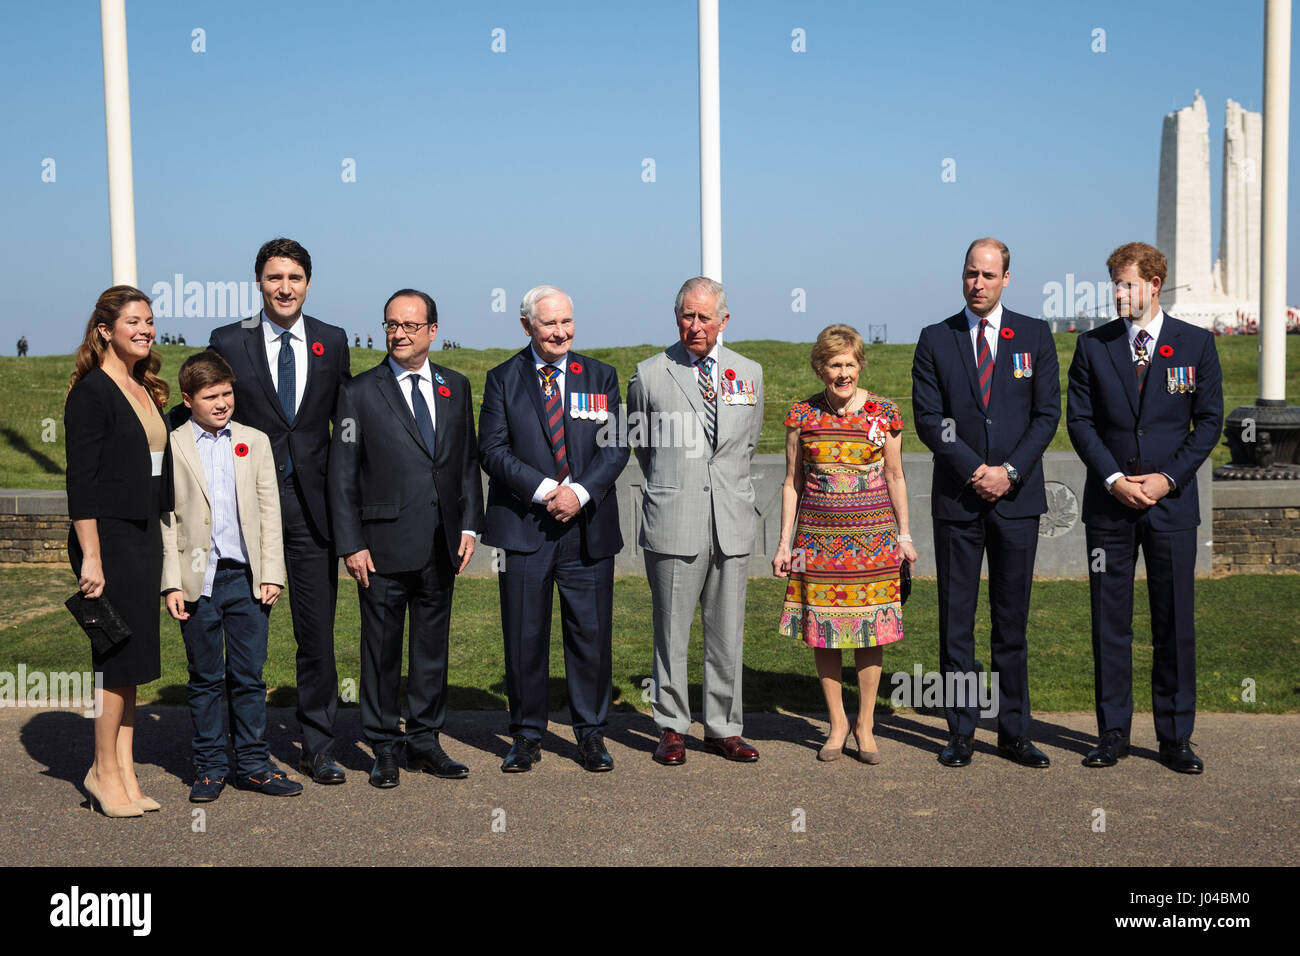 (left to right) Sophie Trudeau, her son Xavier James Trudeau, Canadian Prime Minister Justin Trudeau, French President Francois Hollande, Governor General of Canada David Johnston, The Prince of Wales, Sharon Johnston, The Duke of Cambridge and Prince Harry arrive at the Canadian National Vimy Memorial in France, for the 100th anniversary of the Battle of Vimy Ridge. Stock Photo